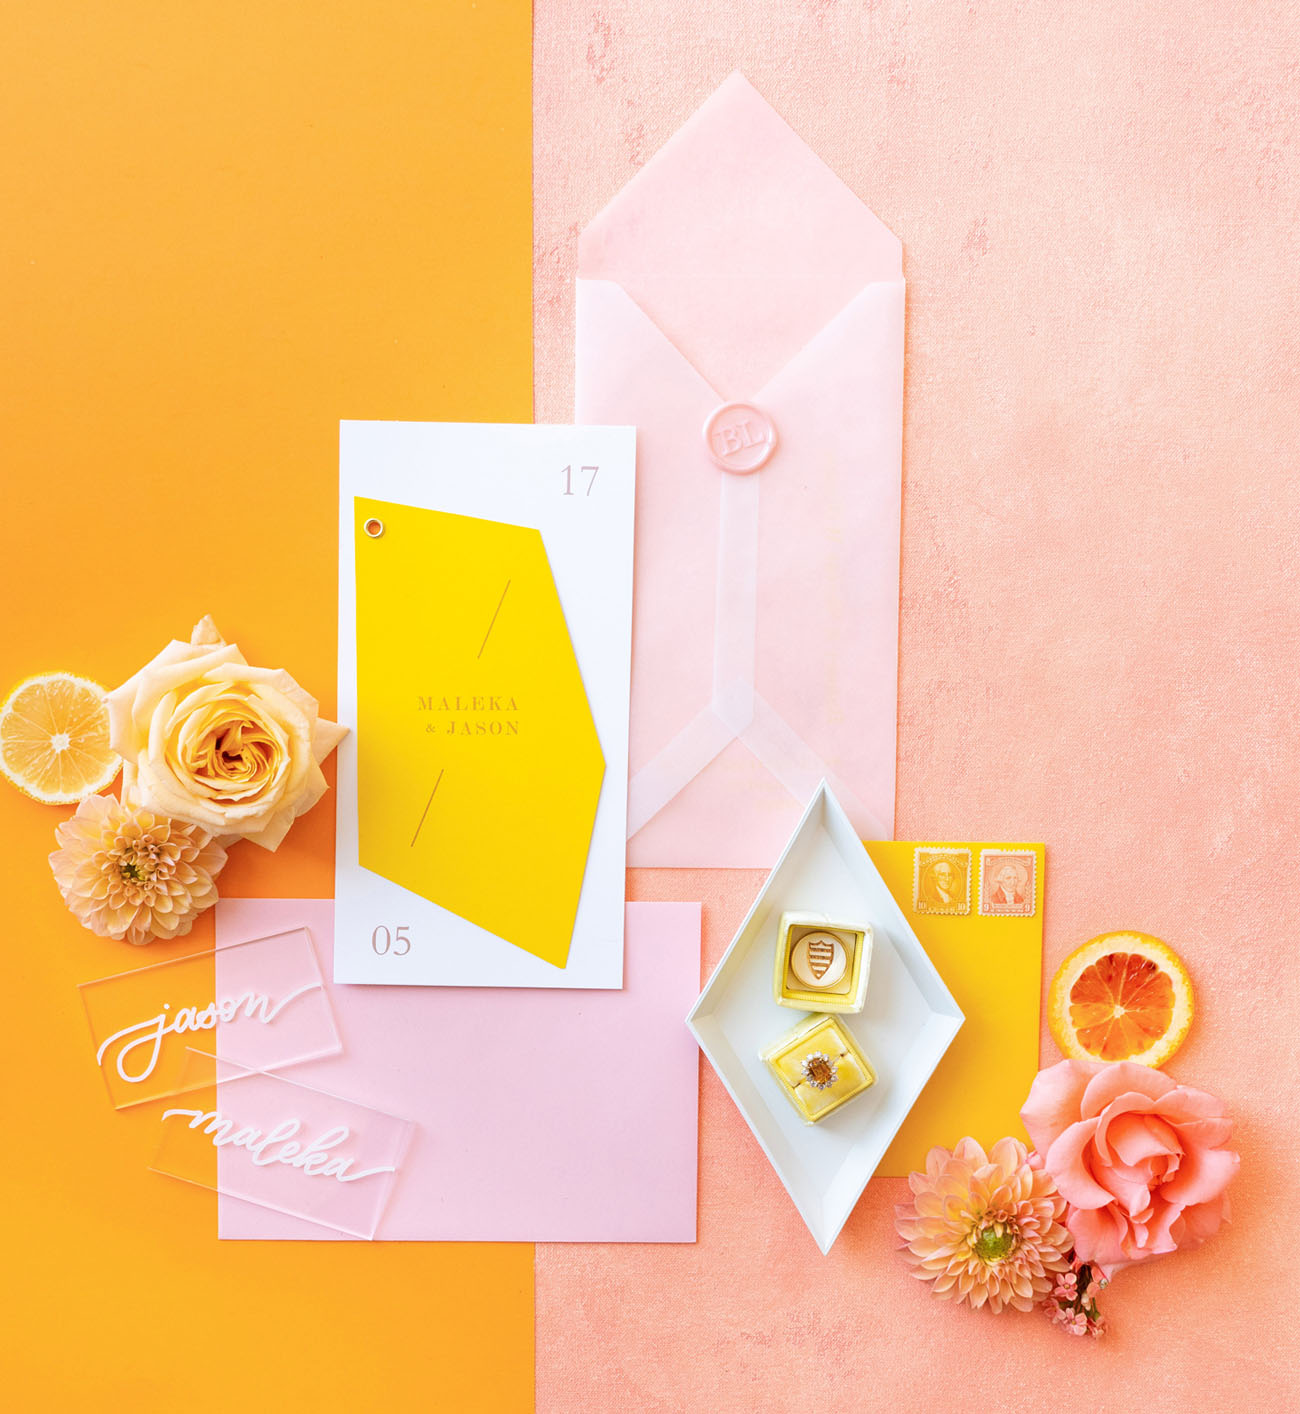 The wedding stationery was done bright, with geometric details and looked super rad